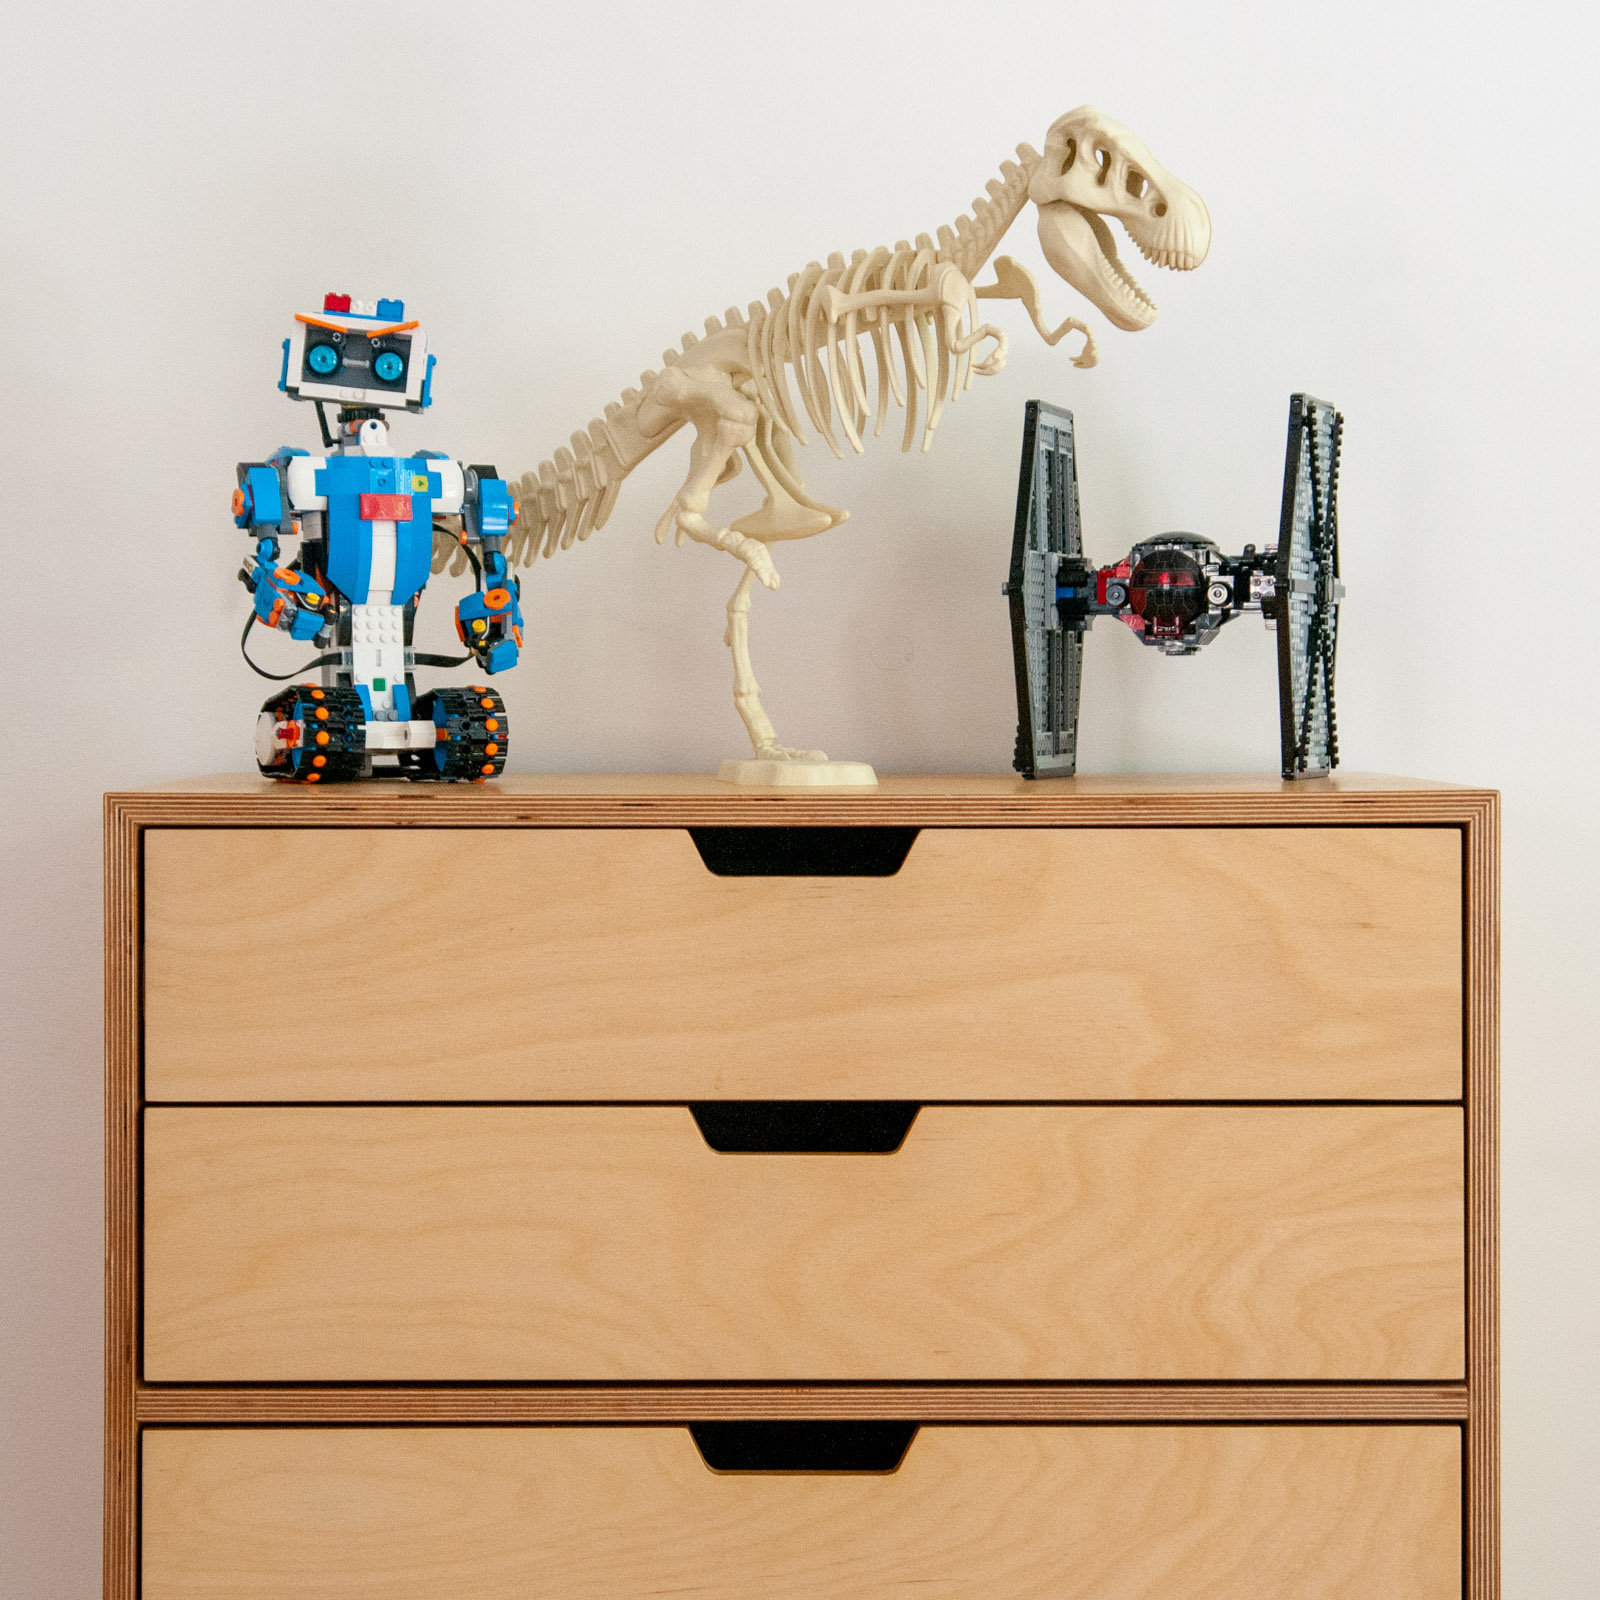 Dresser front view with Lego Tie Fighter, Lego robot, and T-rex model skeleton on top